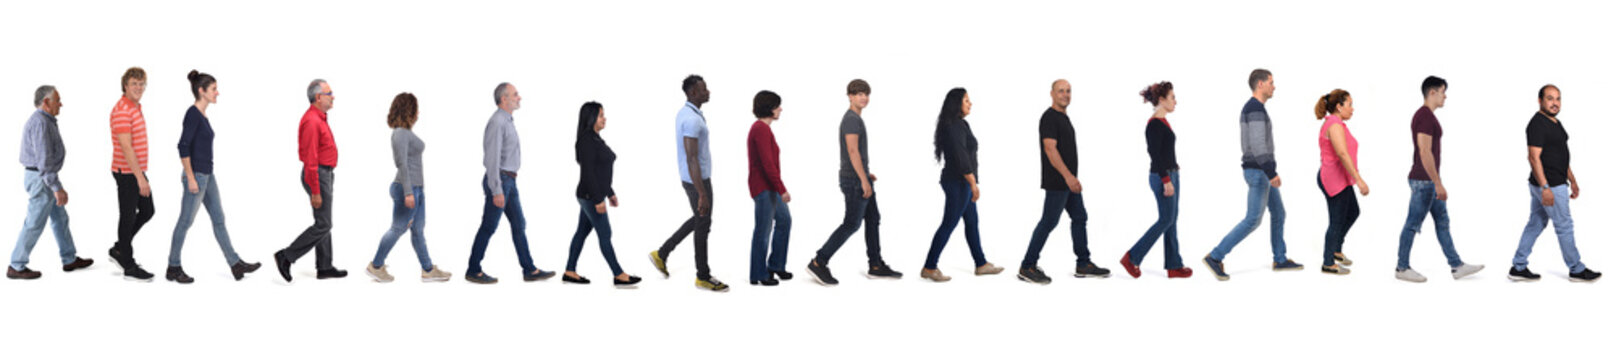 large group of people wearing blue jeans walking on white background